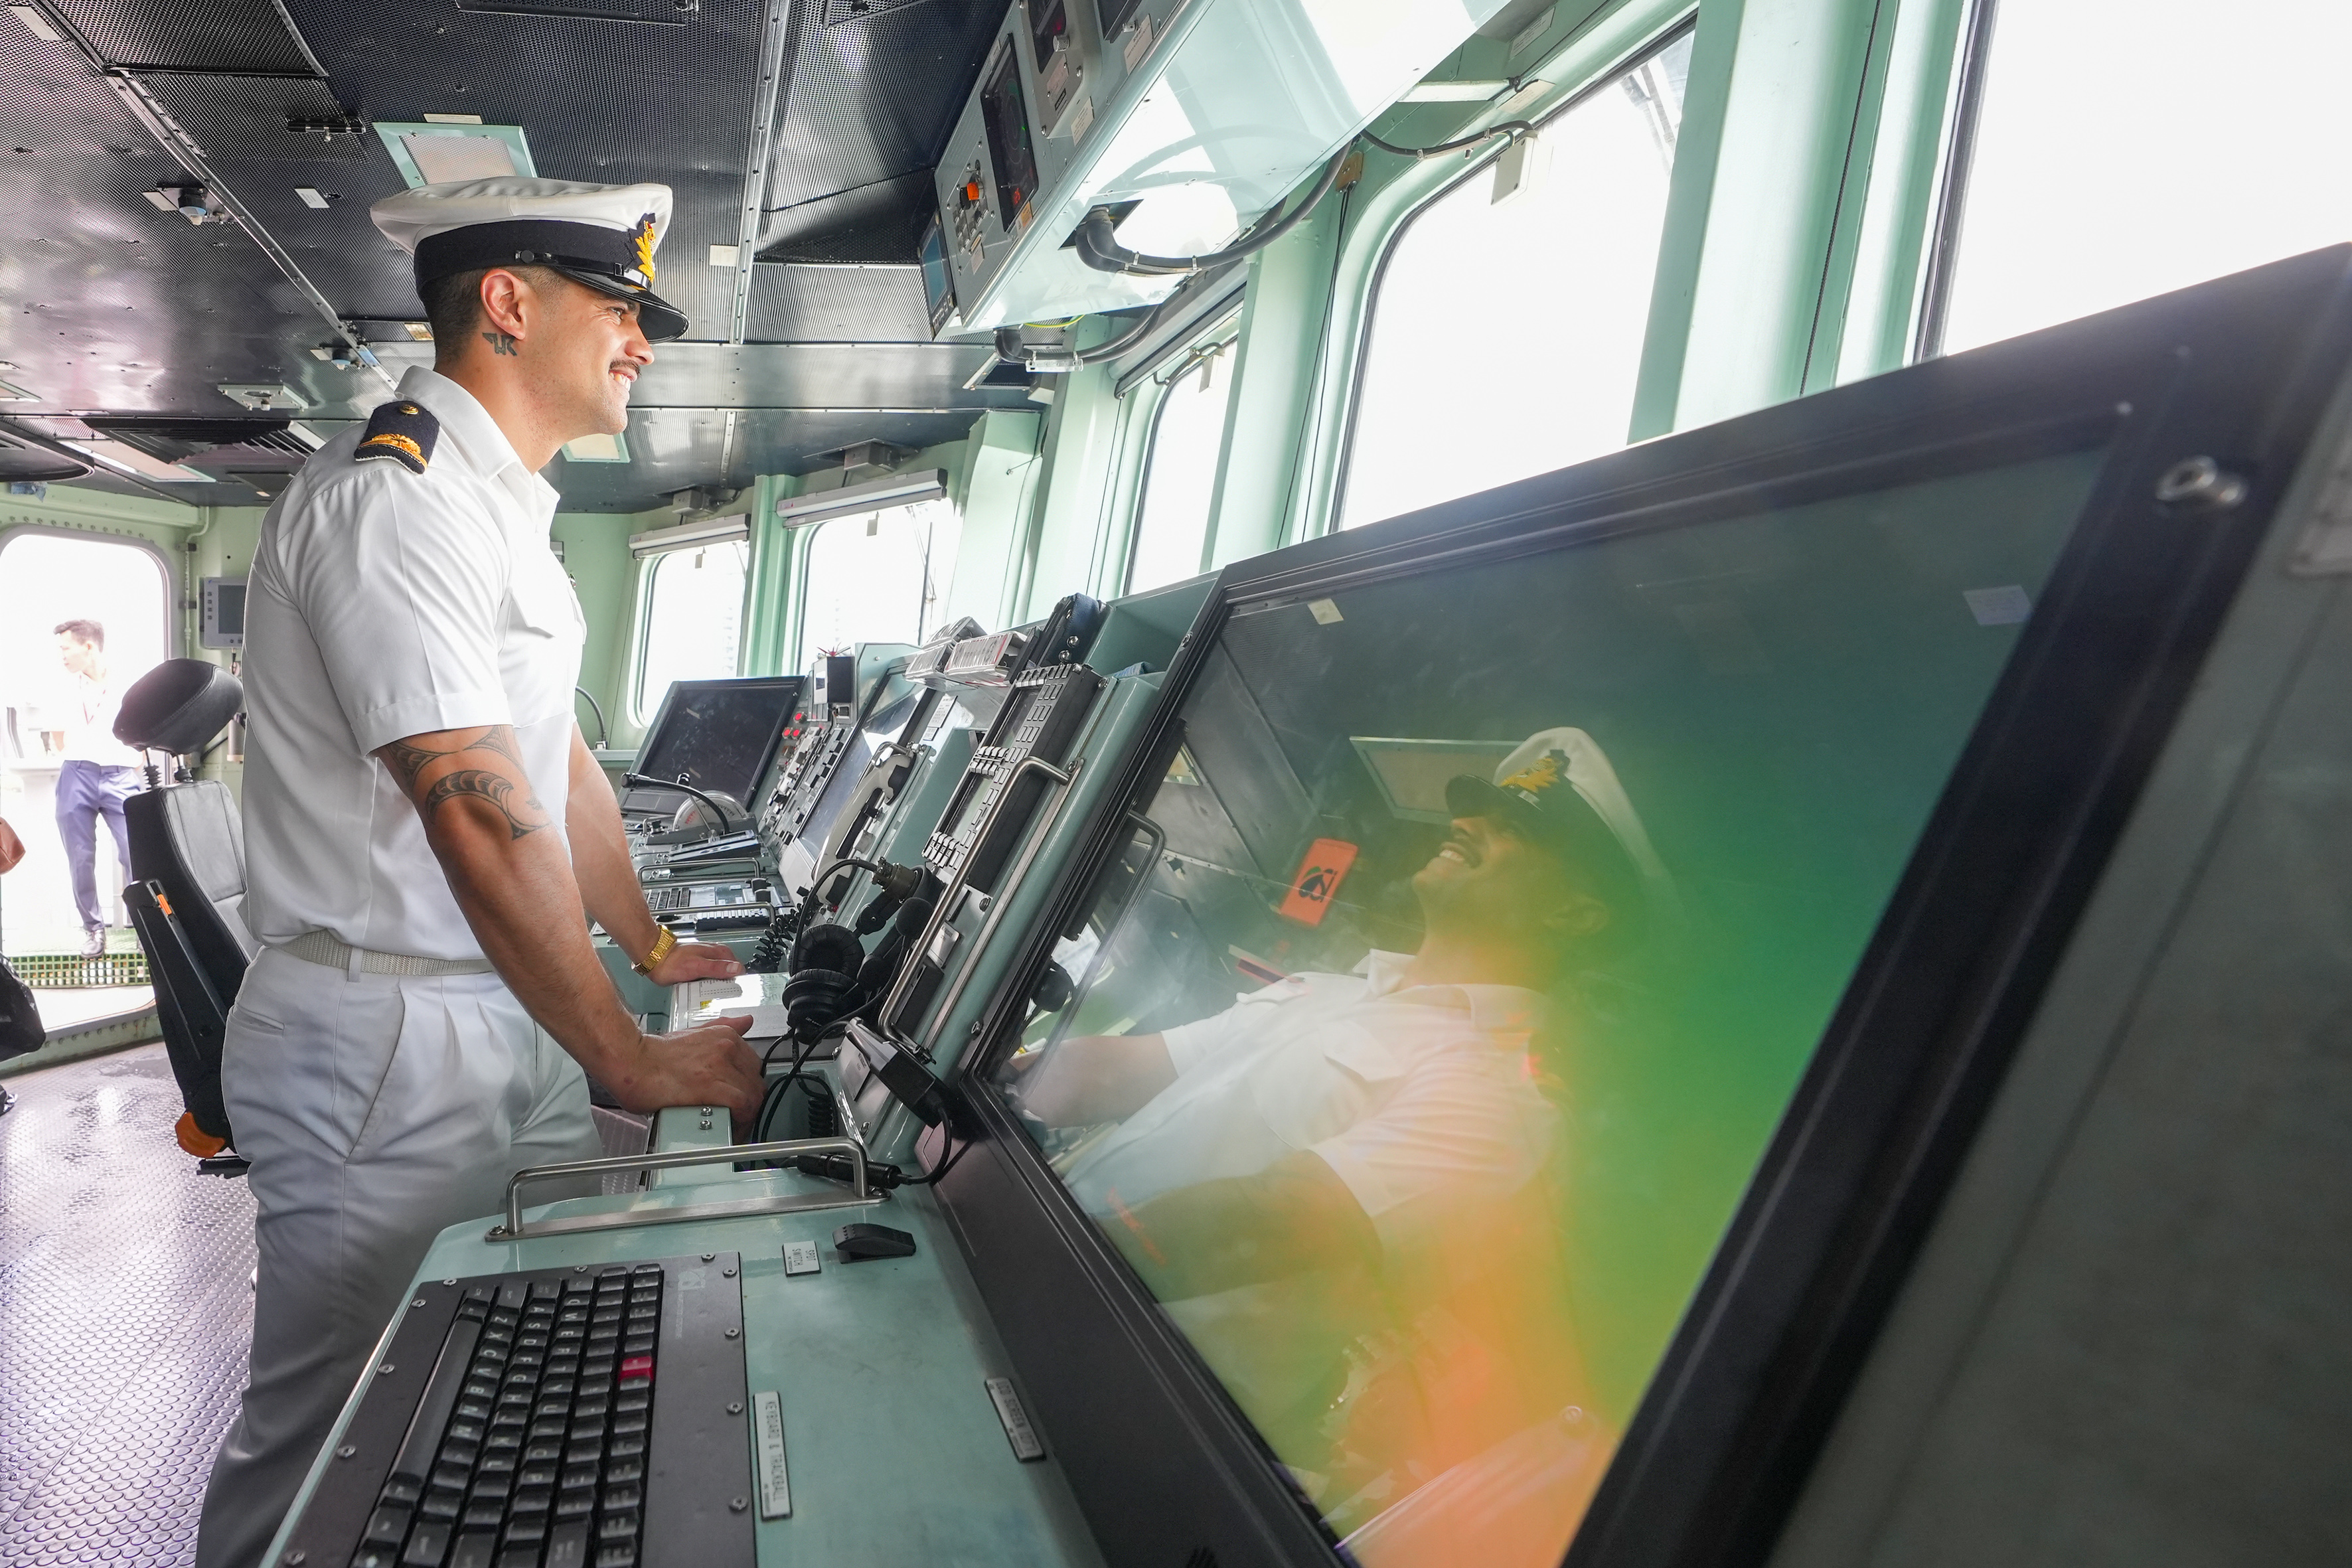 An officer in the control room on board the HMNZS Te Mana - Photo: Huu Hanh / Tuoi Tre